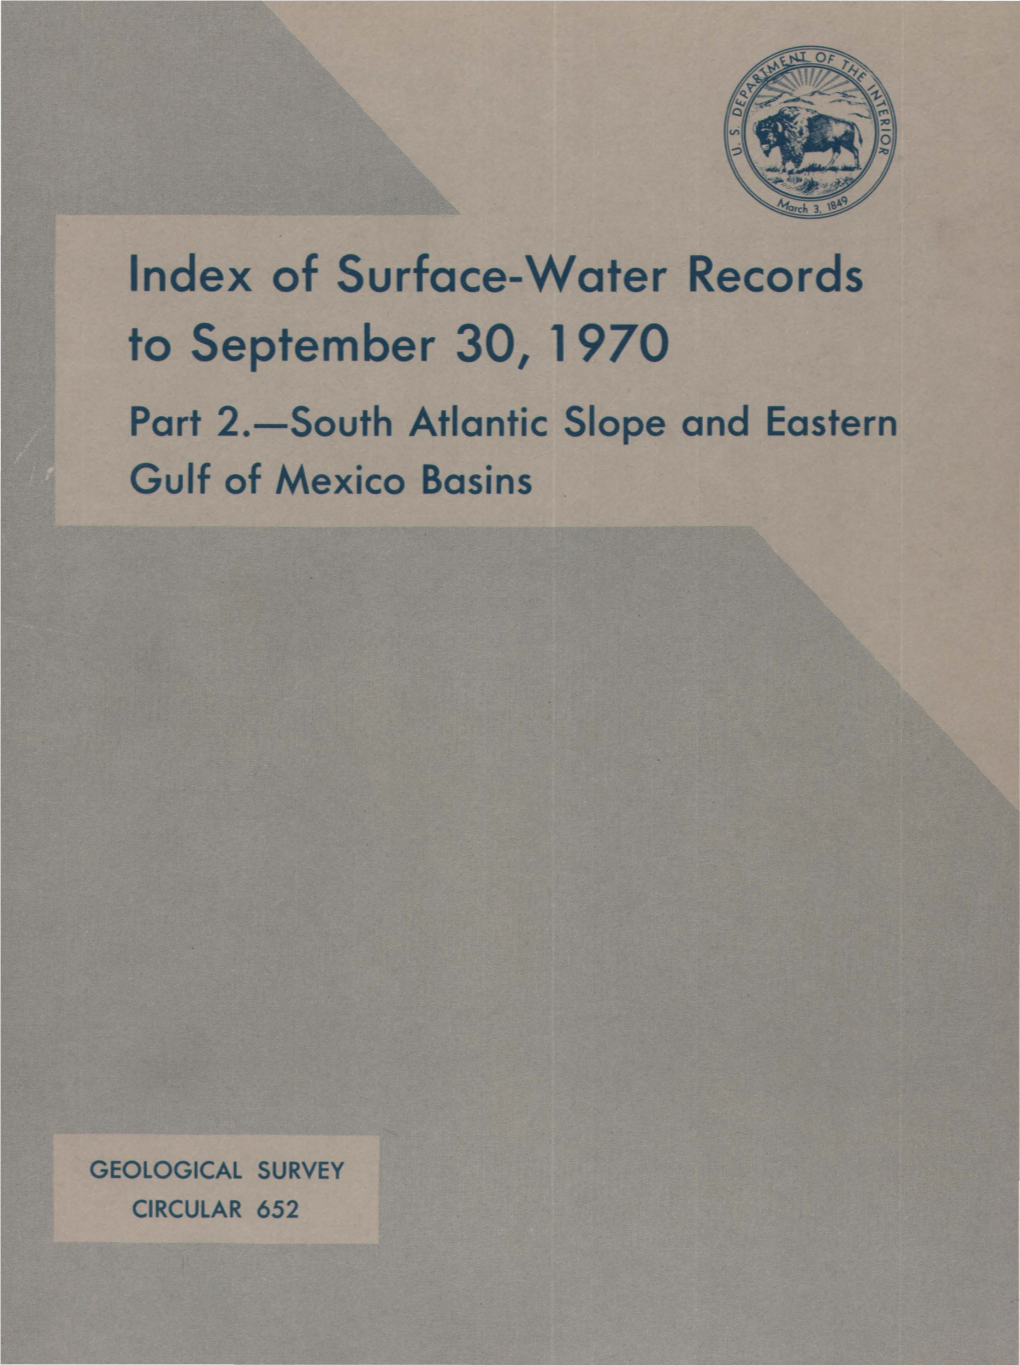 Of Surface-Water Records to September 30, 1970 Part 2.-South Atlantic Slope and Eastern Gulf of Mexico Basins